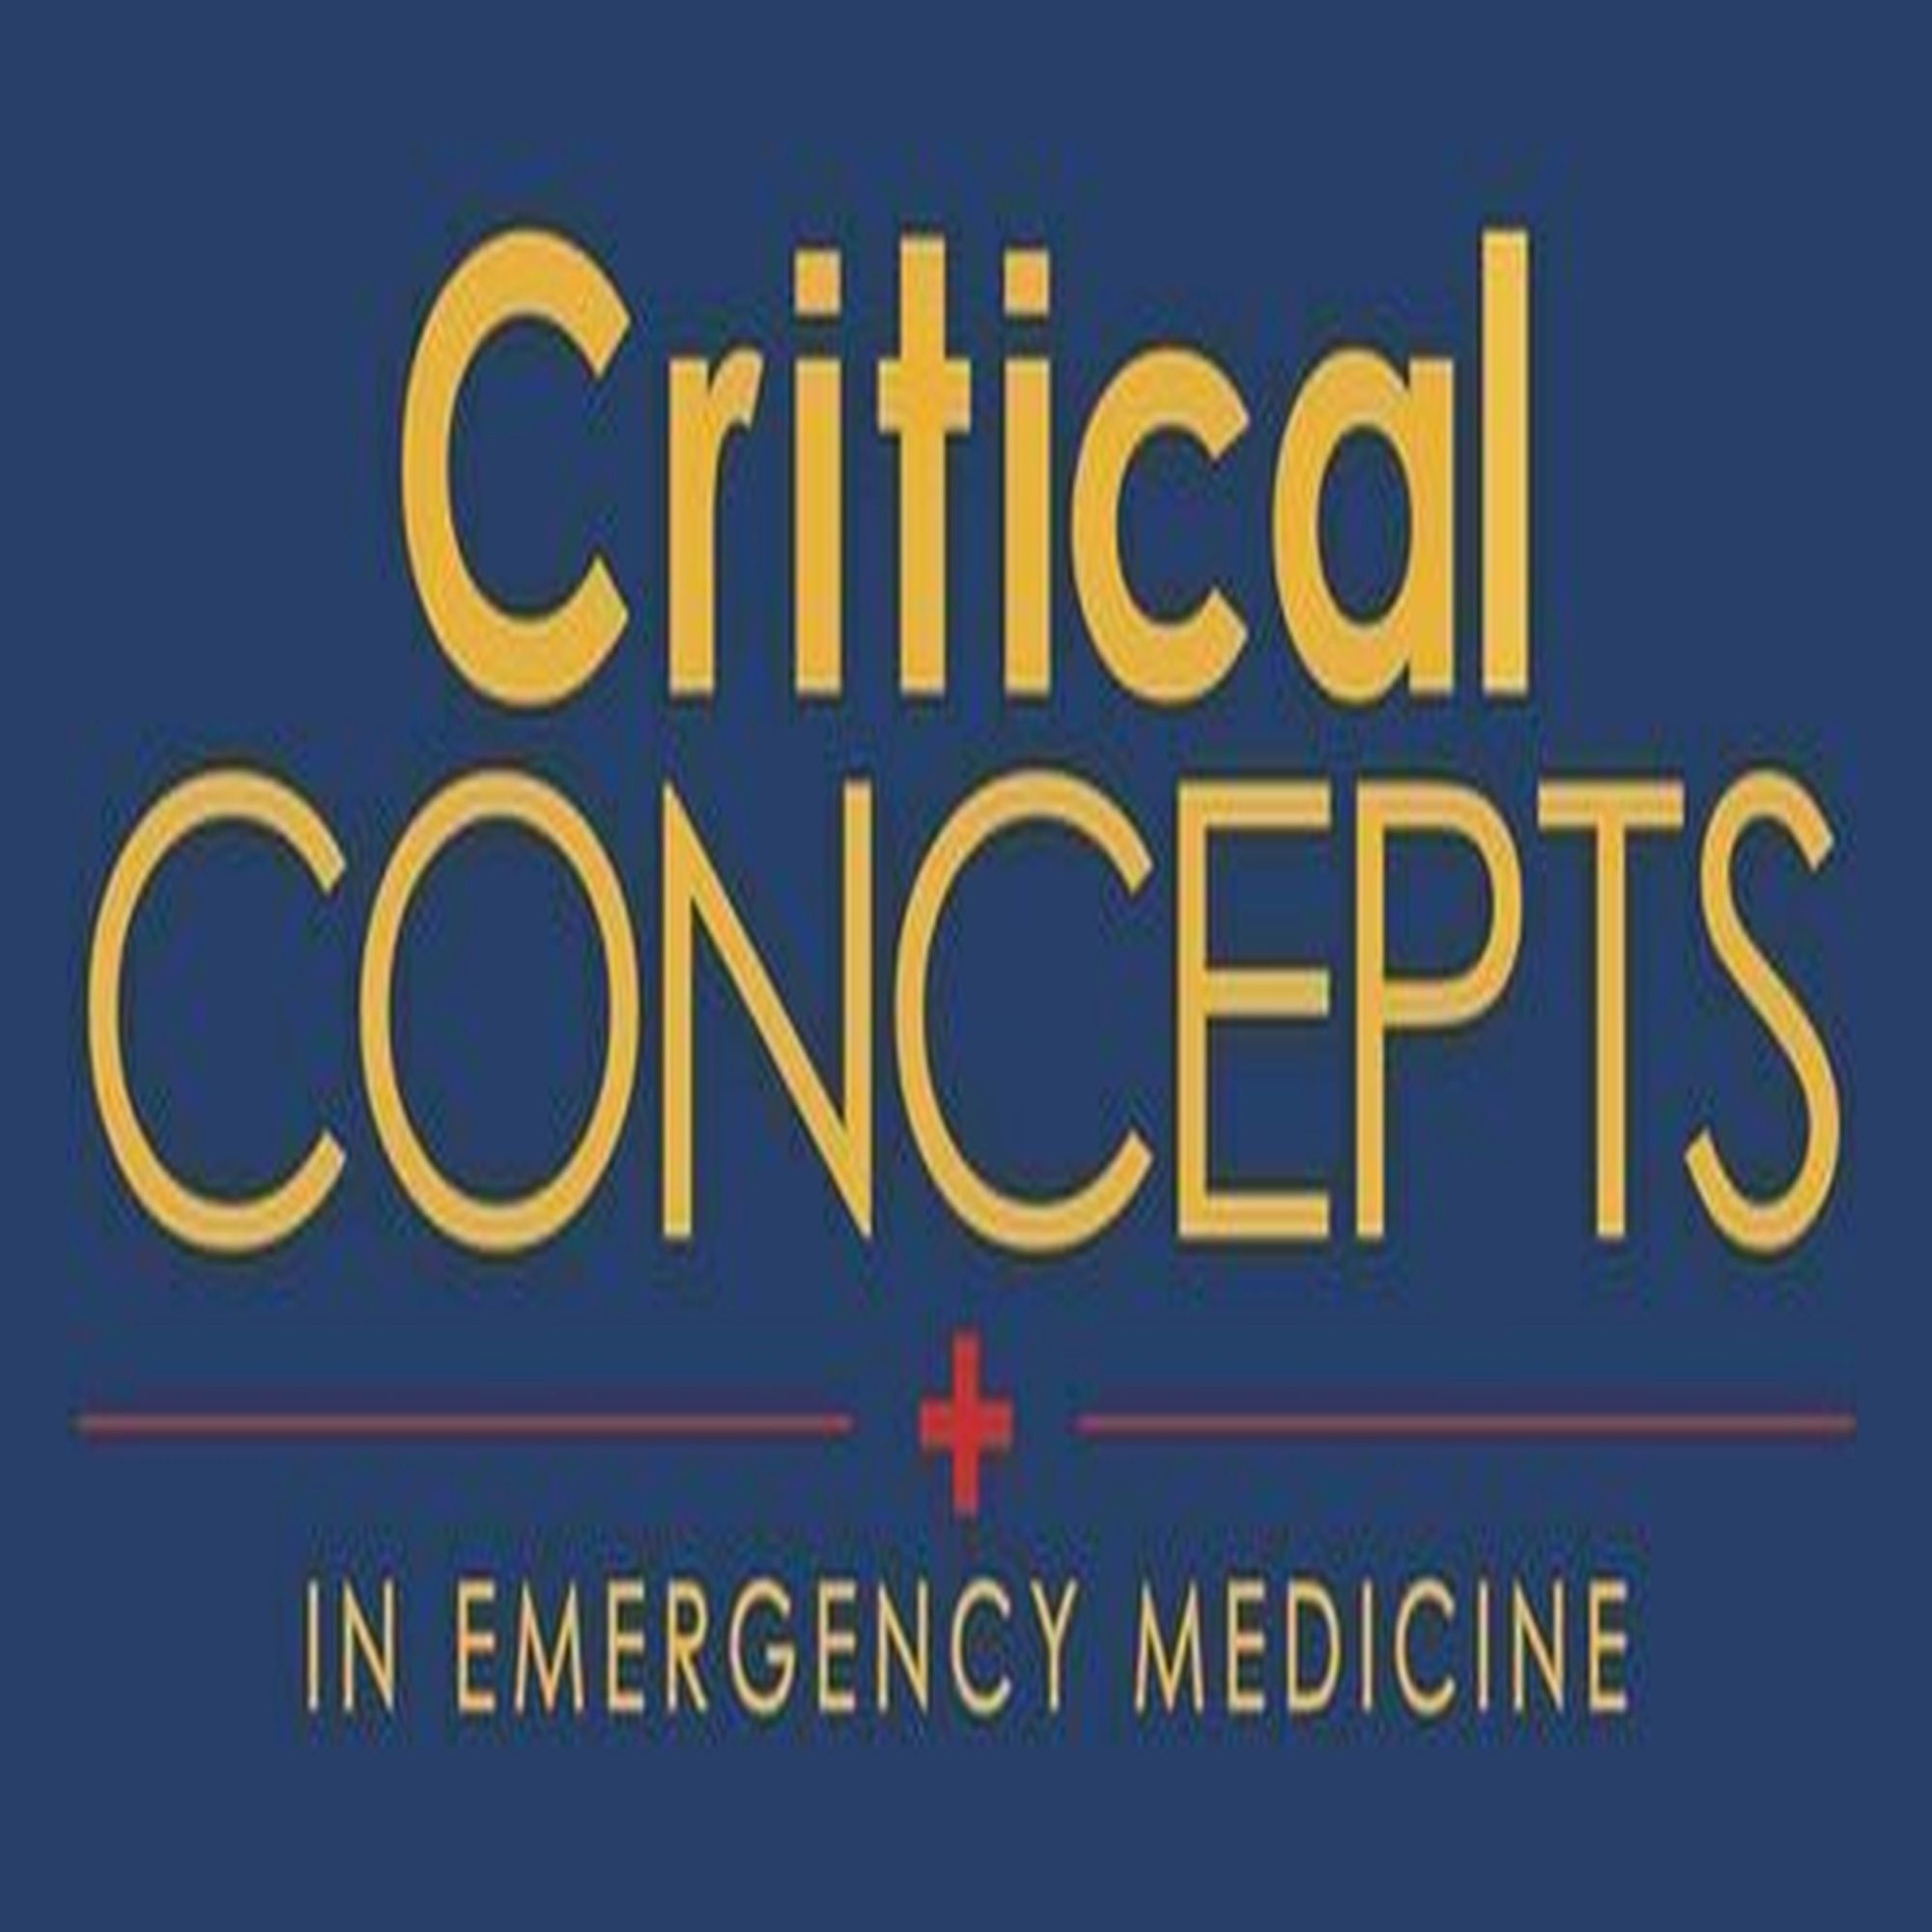 (CCEM) Critical Concepts in Emergency Medicine 2023, New Orleans, Louisiana, United States